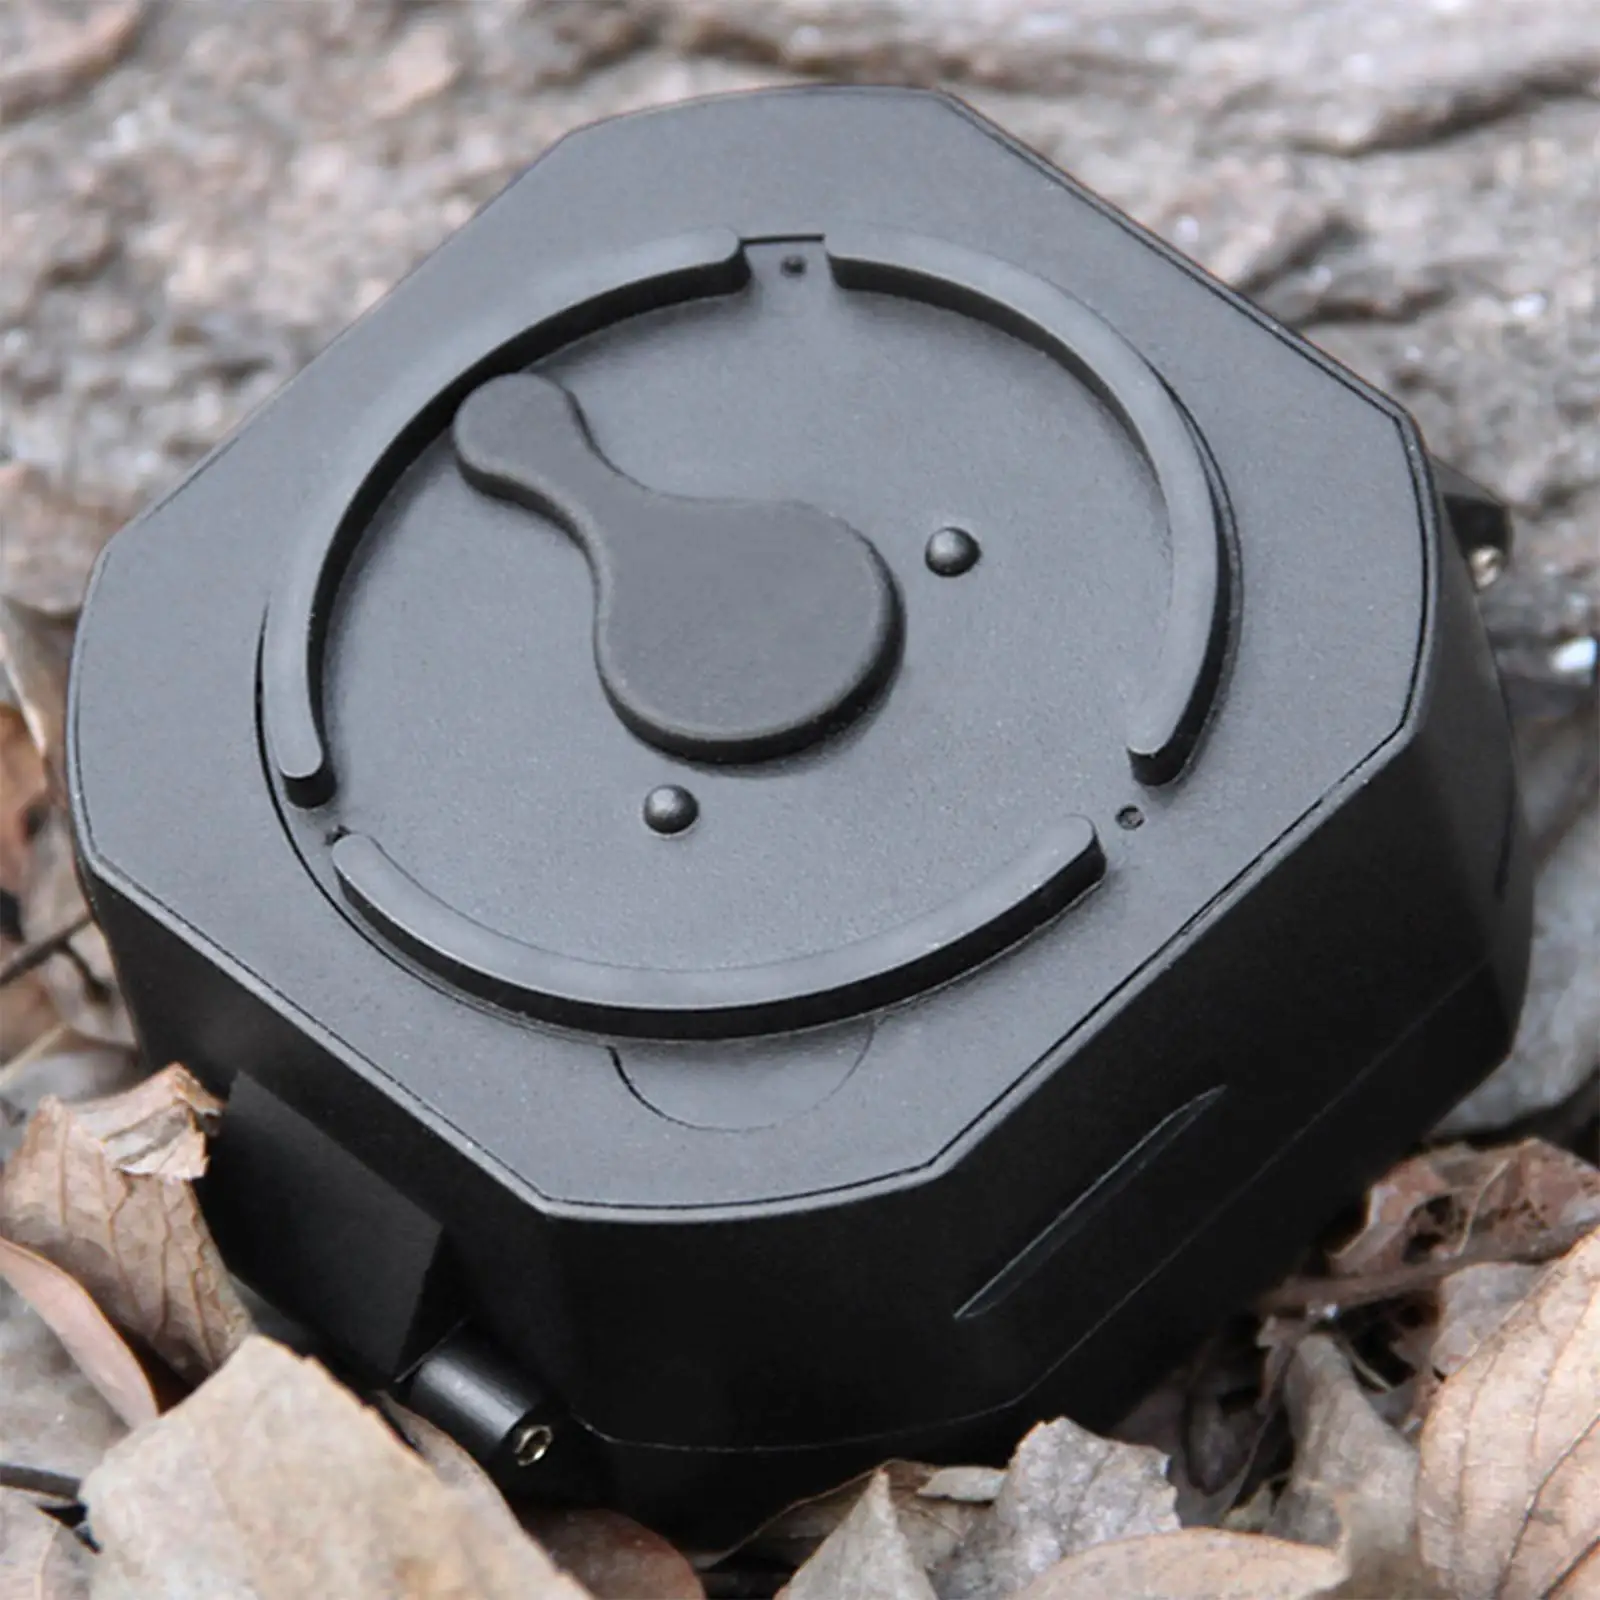 Multifunction Geology Compass Pocket Compass Navigation for Survival Camping